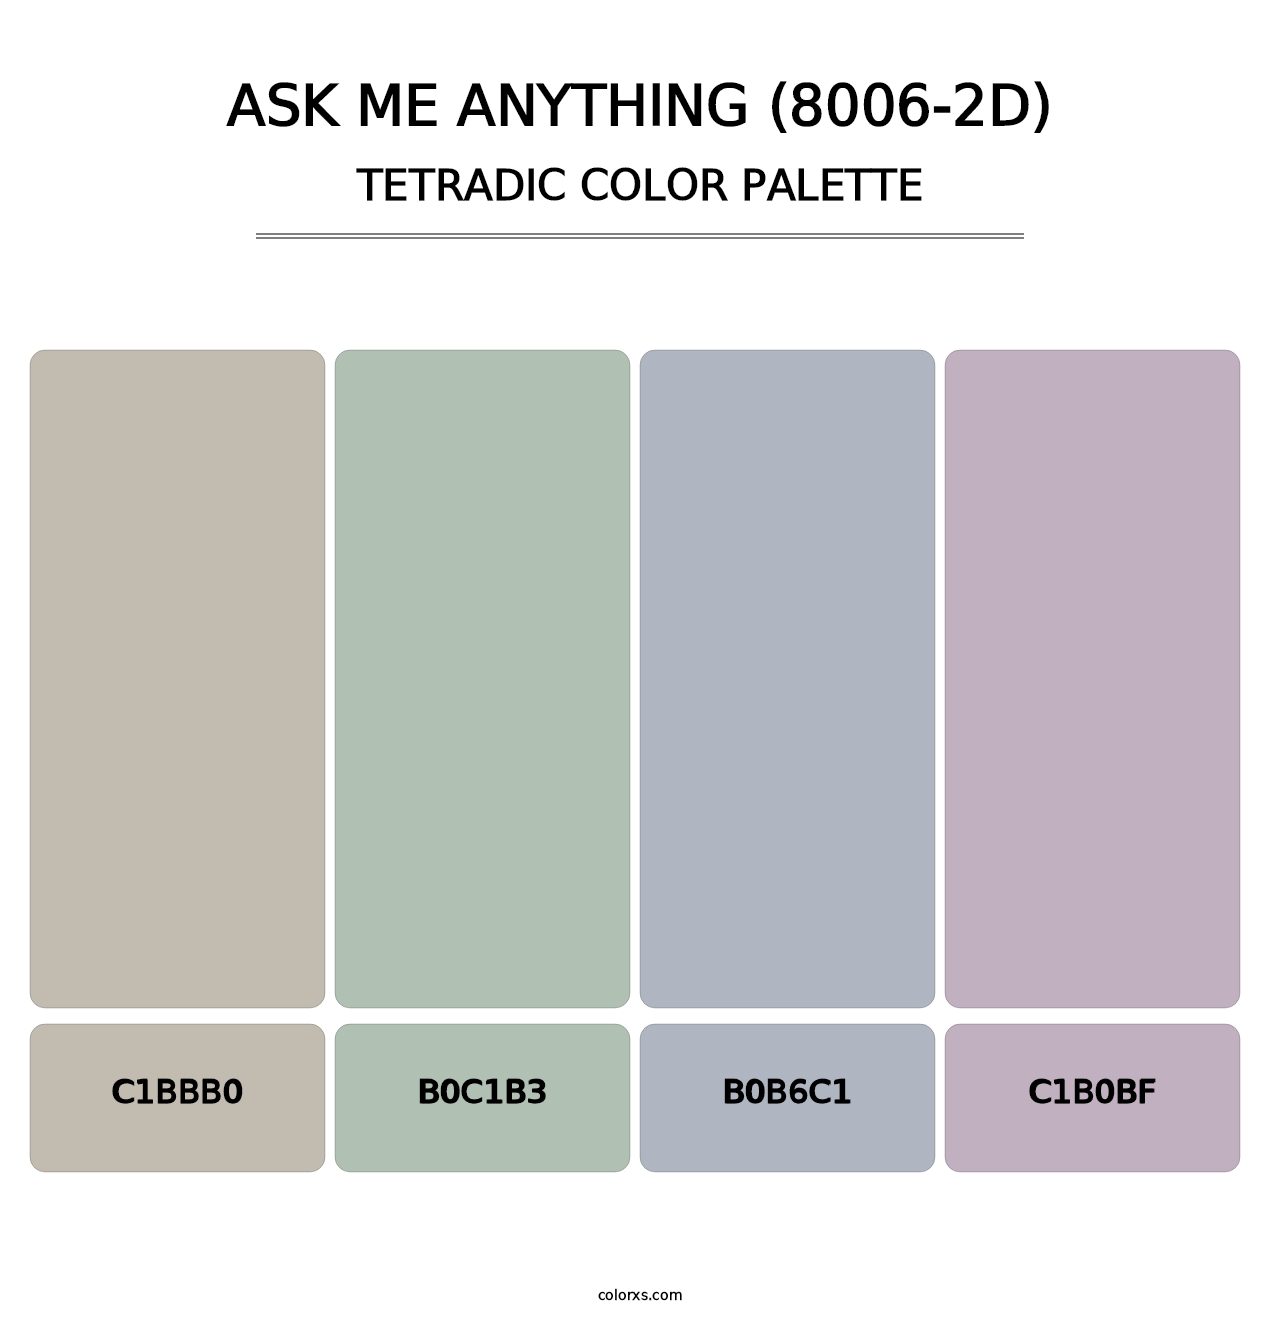 Ask Me Anything (8006-2D) - Tetradic Color Palette